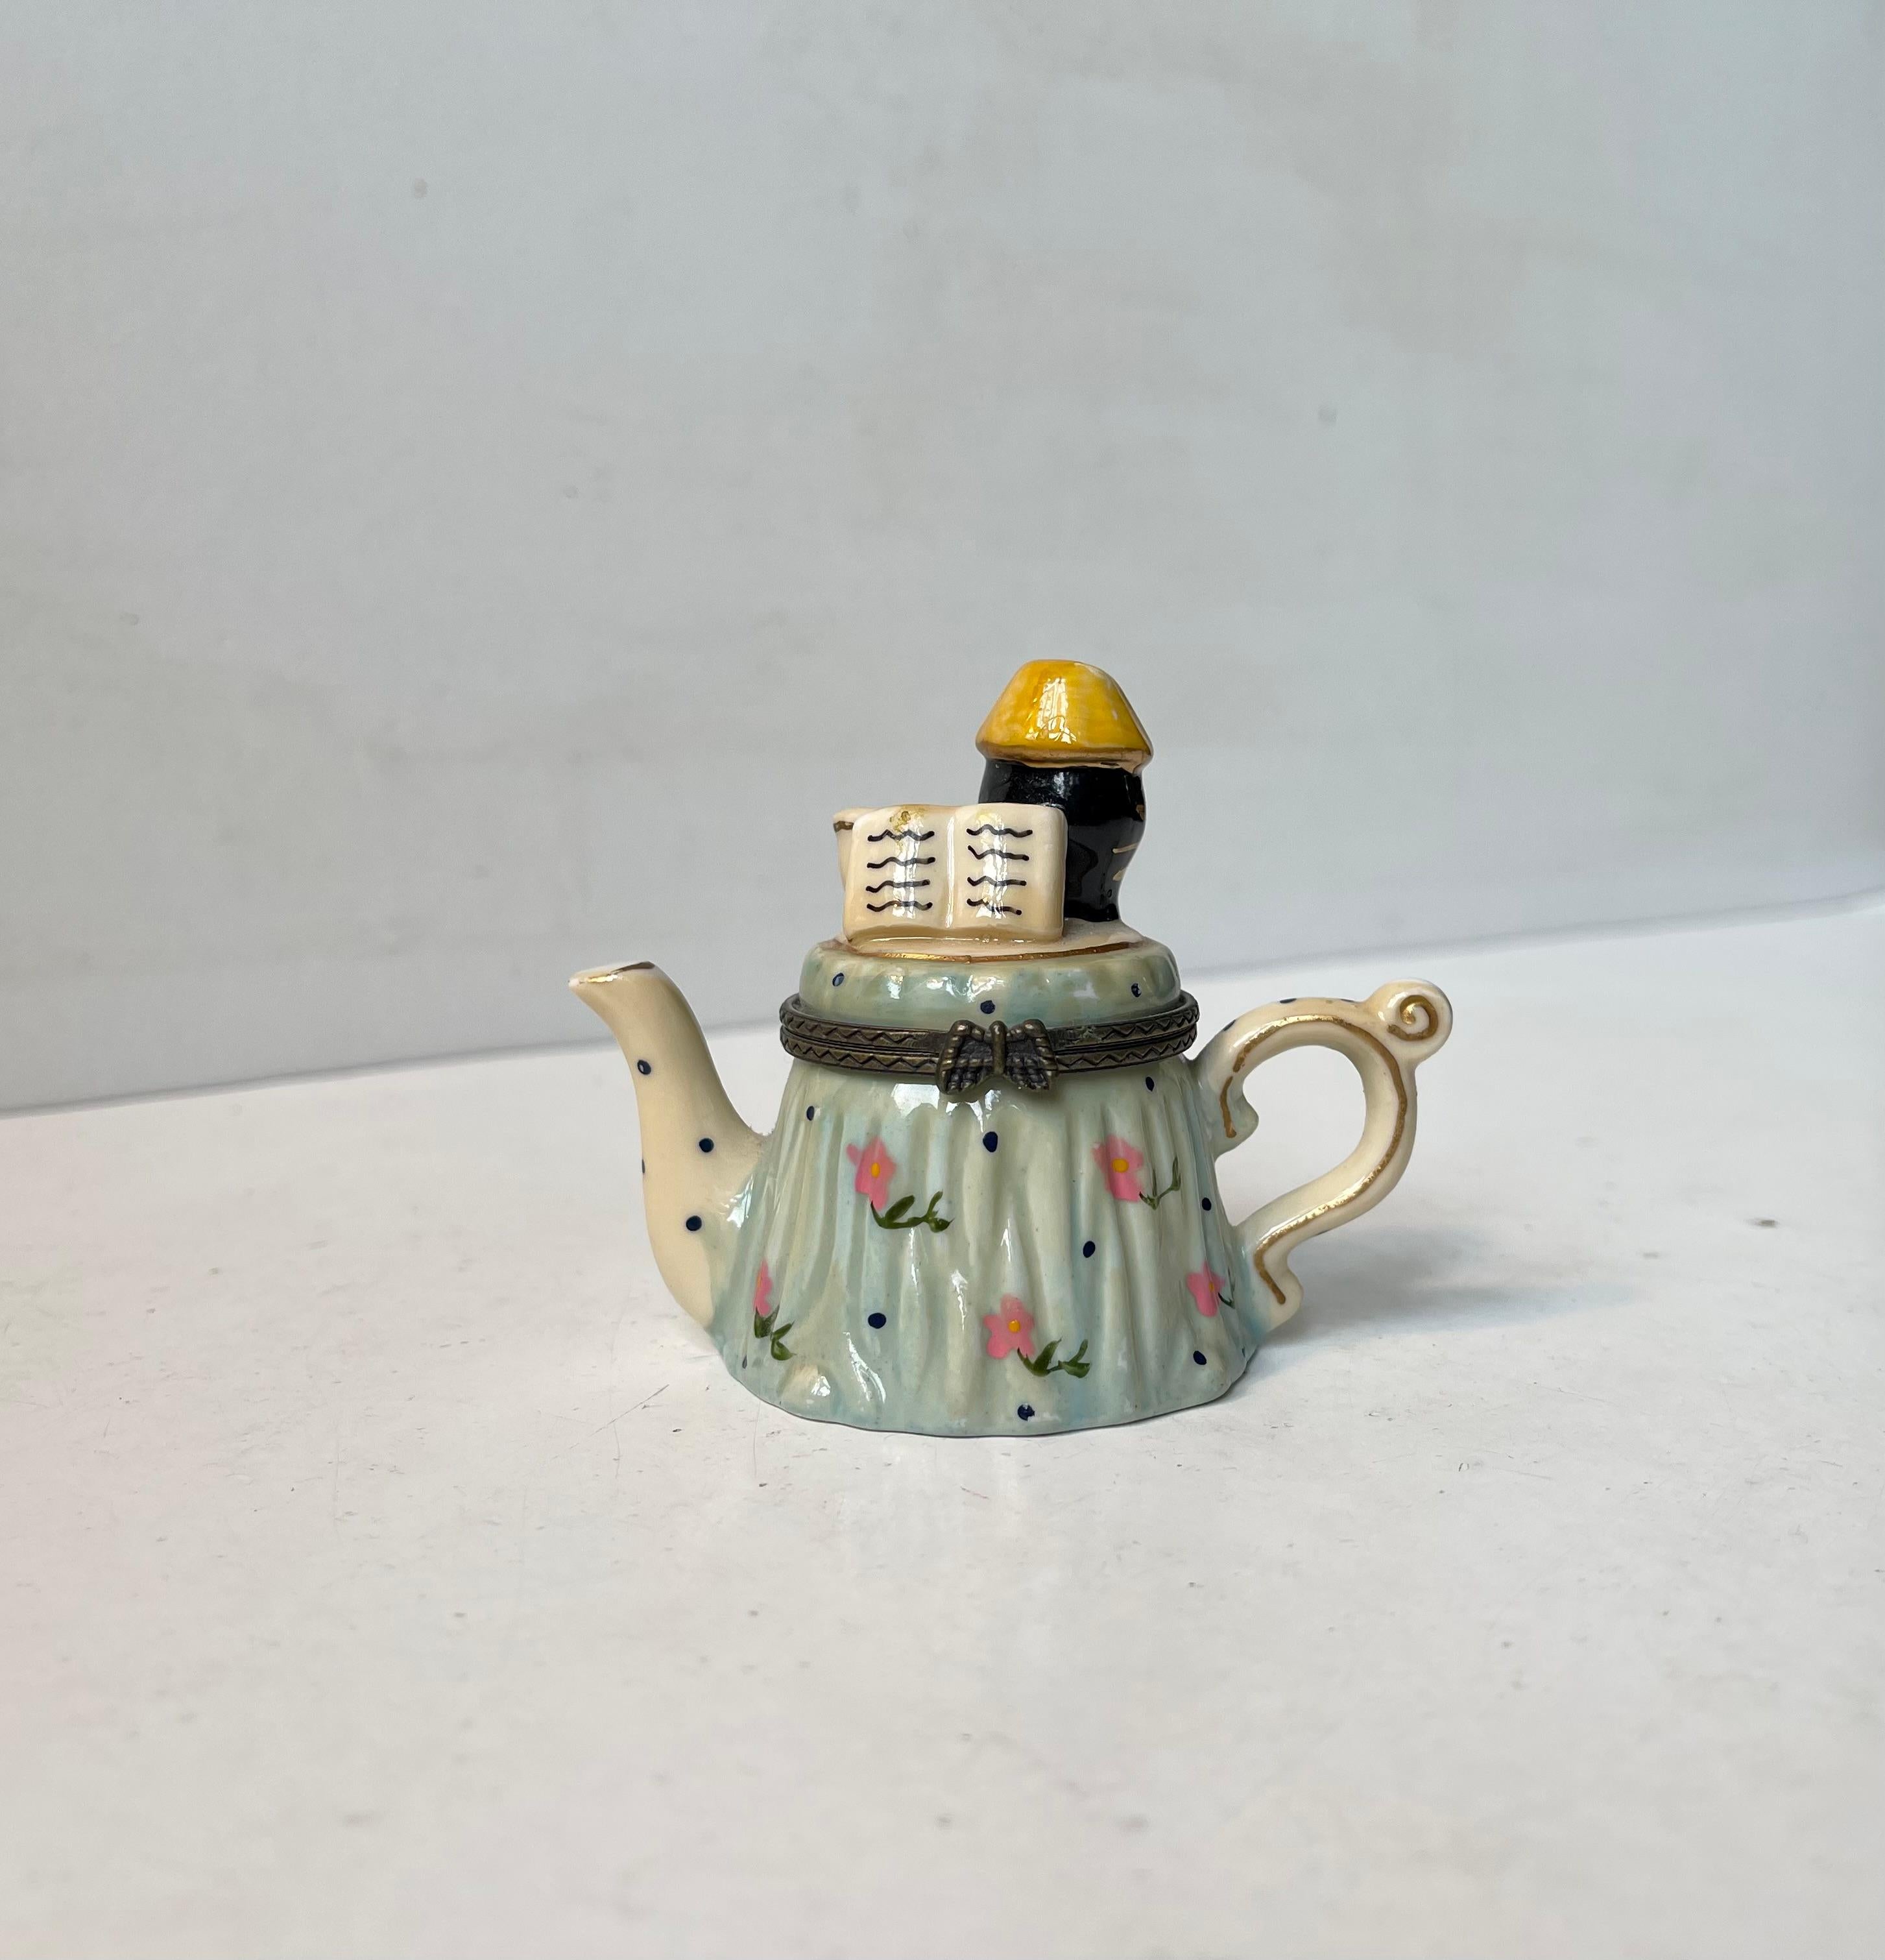 Curios novelty trinket in the shape of a porcelain teapot trinket hand-painted with pink flowers, a coffee cup and a hatted black reader (cat or person). The lid mechanism in patinated brass features a butterfly as handle. It has no markings but it